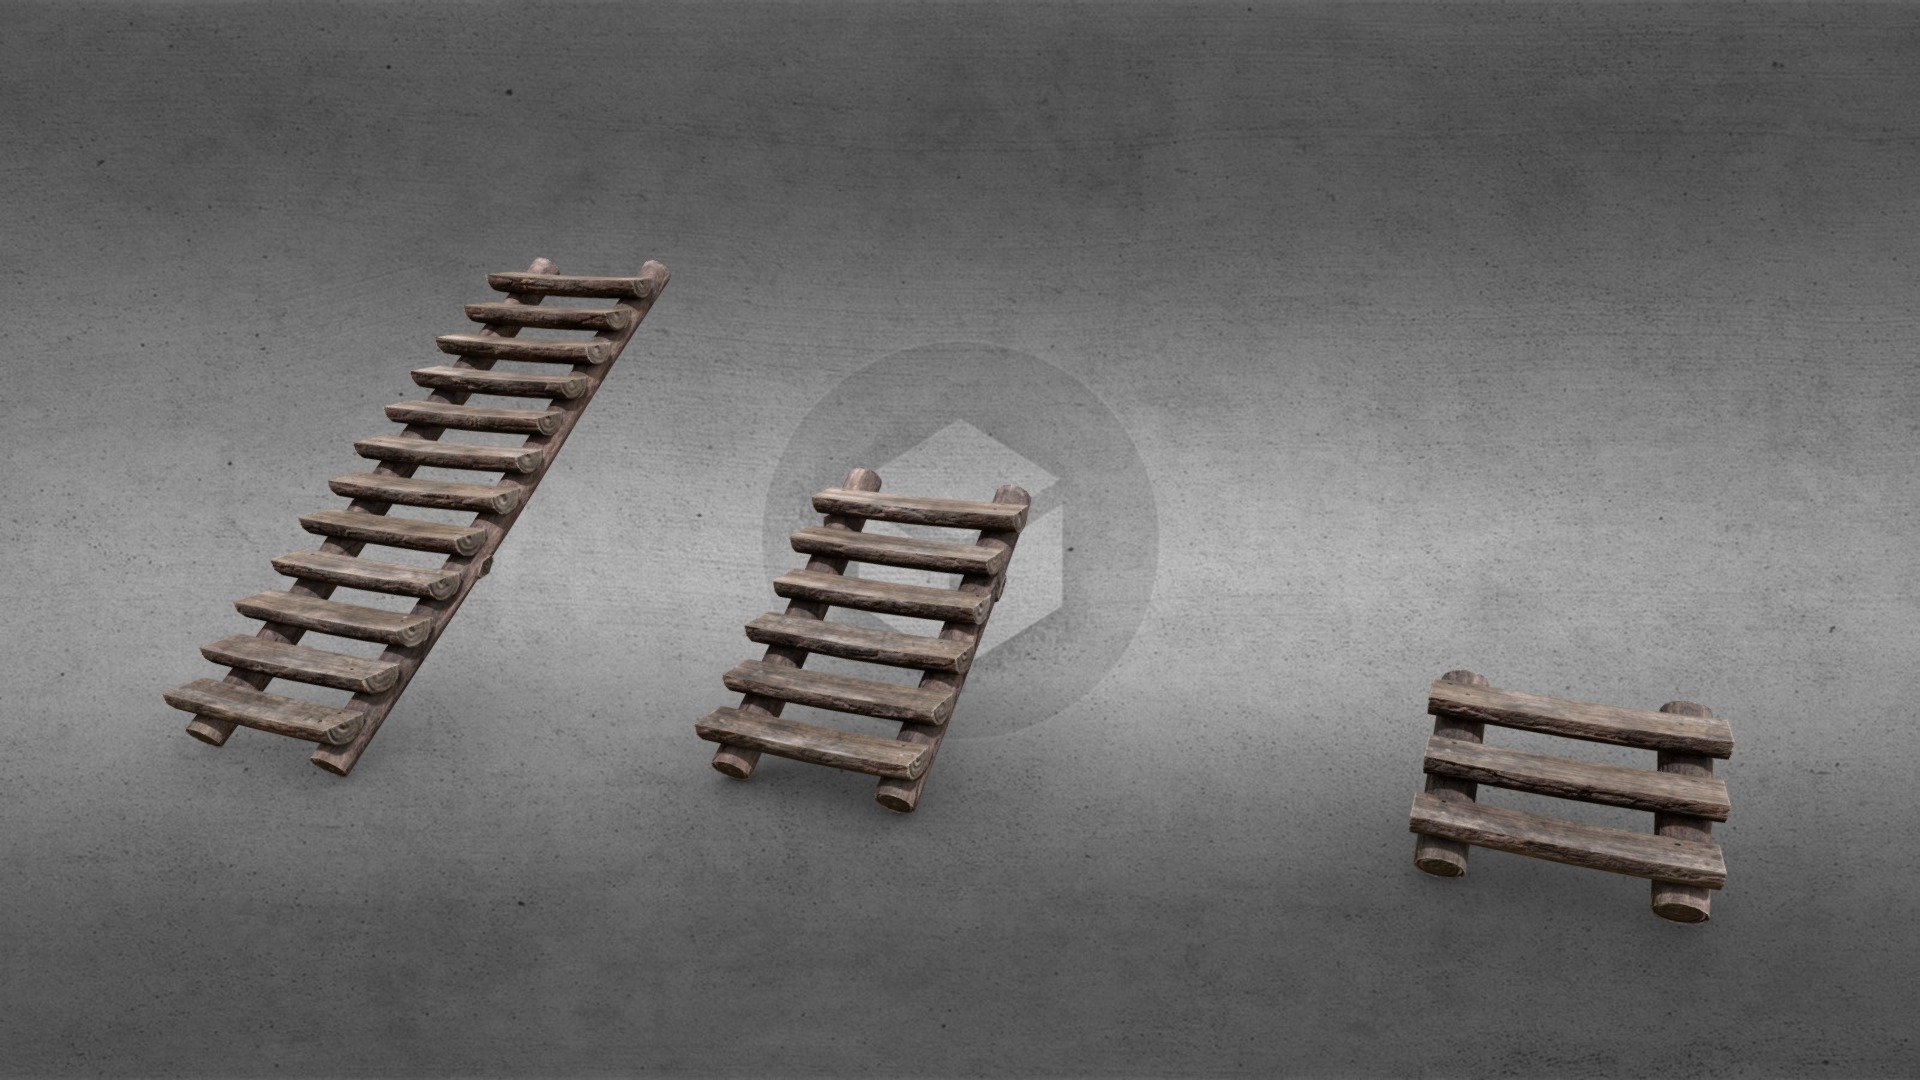 Introducing log stairs, set of 3 assets:

Includes:




3 Log Stairs In Various Sizes

For support or other information please send us an e-mail at info@sunbox.games

Check out our other work at sunbox.games - Simple Log Stairs - 3 Sizes - Download Free 3D model by Sunbox Games (@sunboxgames) 3d model